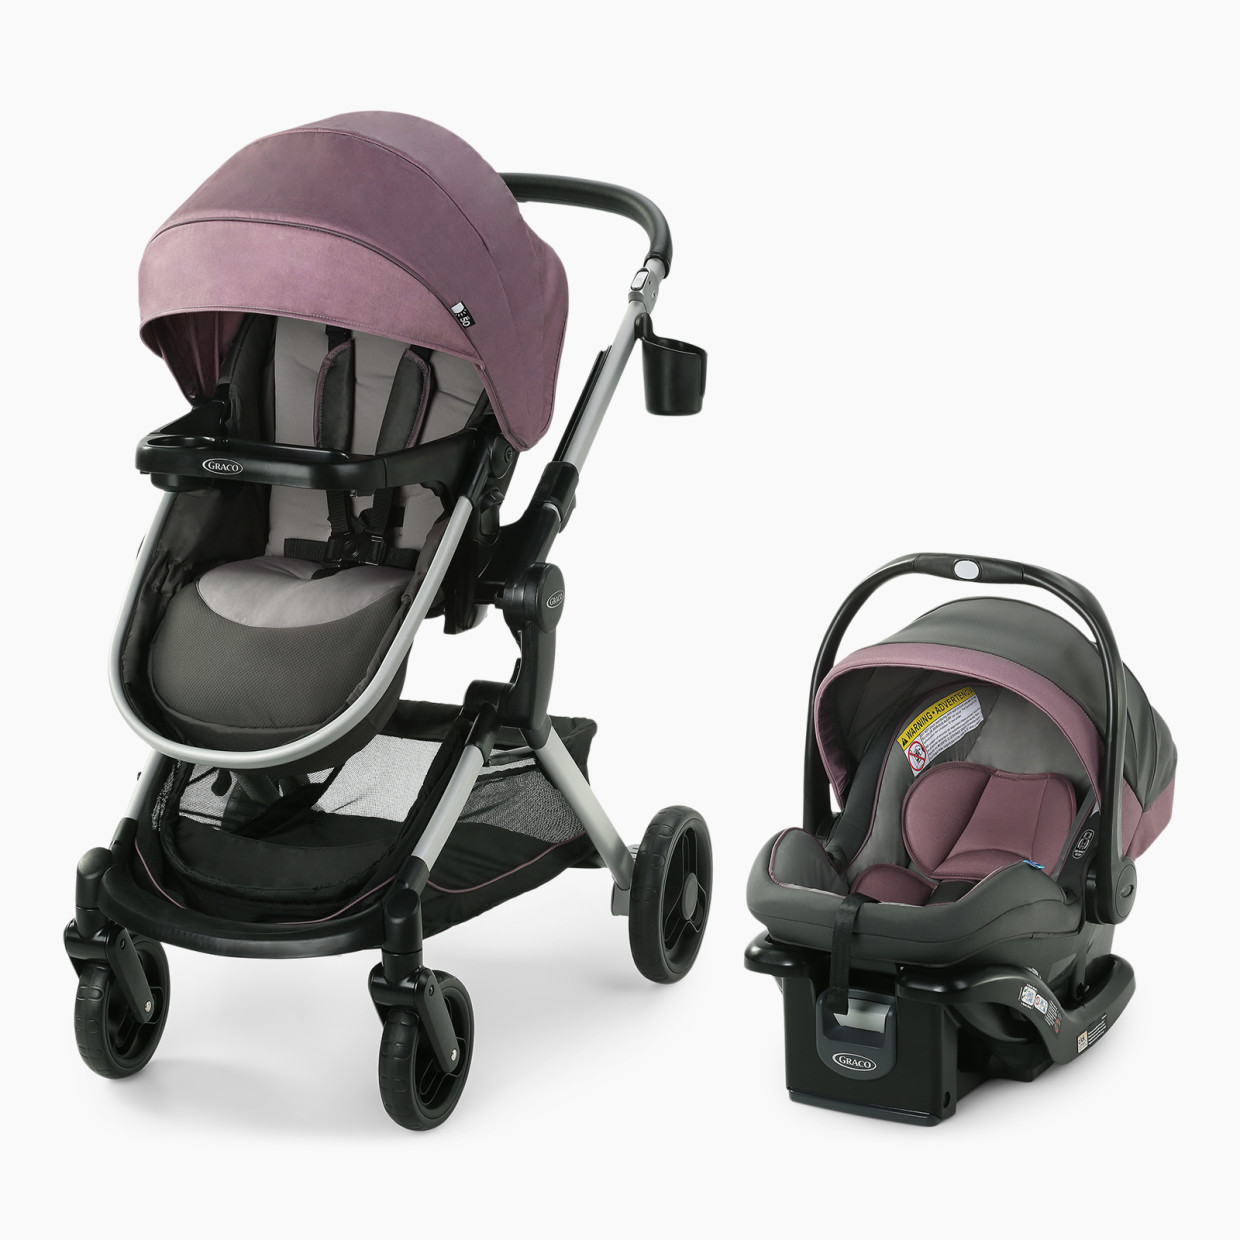 Graco Modes Nest Travel System - Norah (2020 Discontinued).